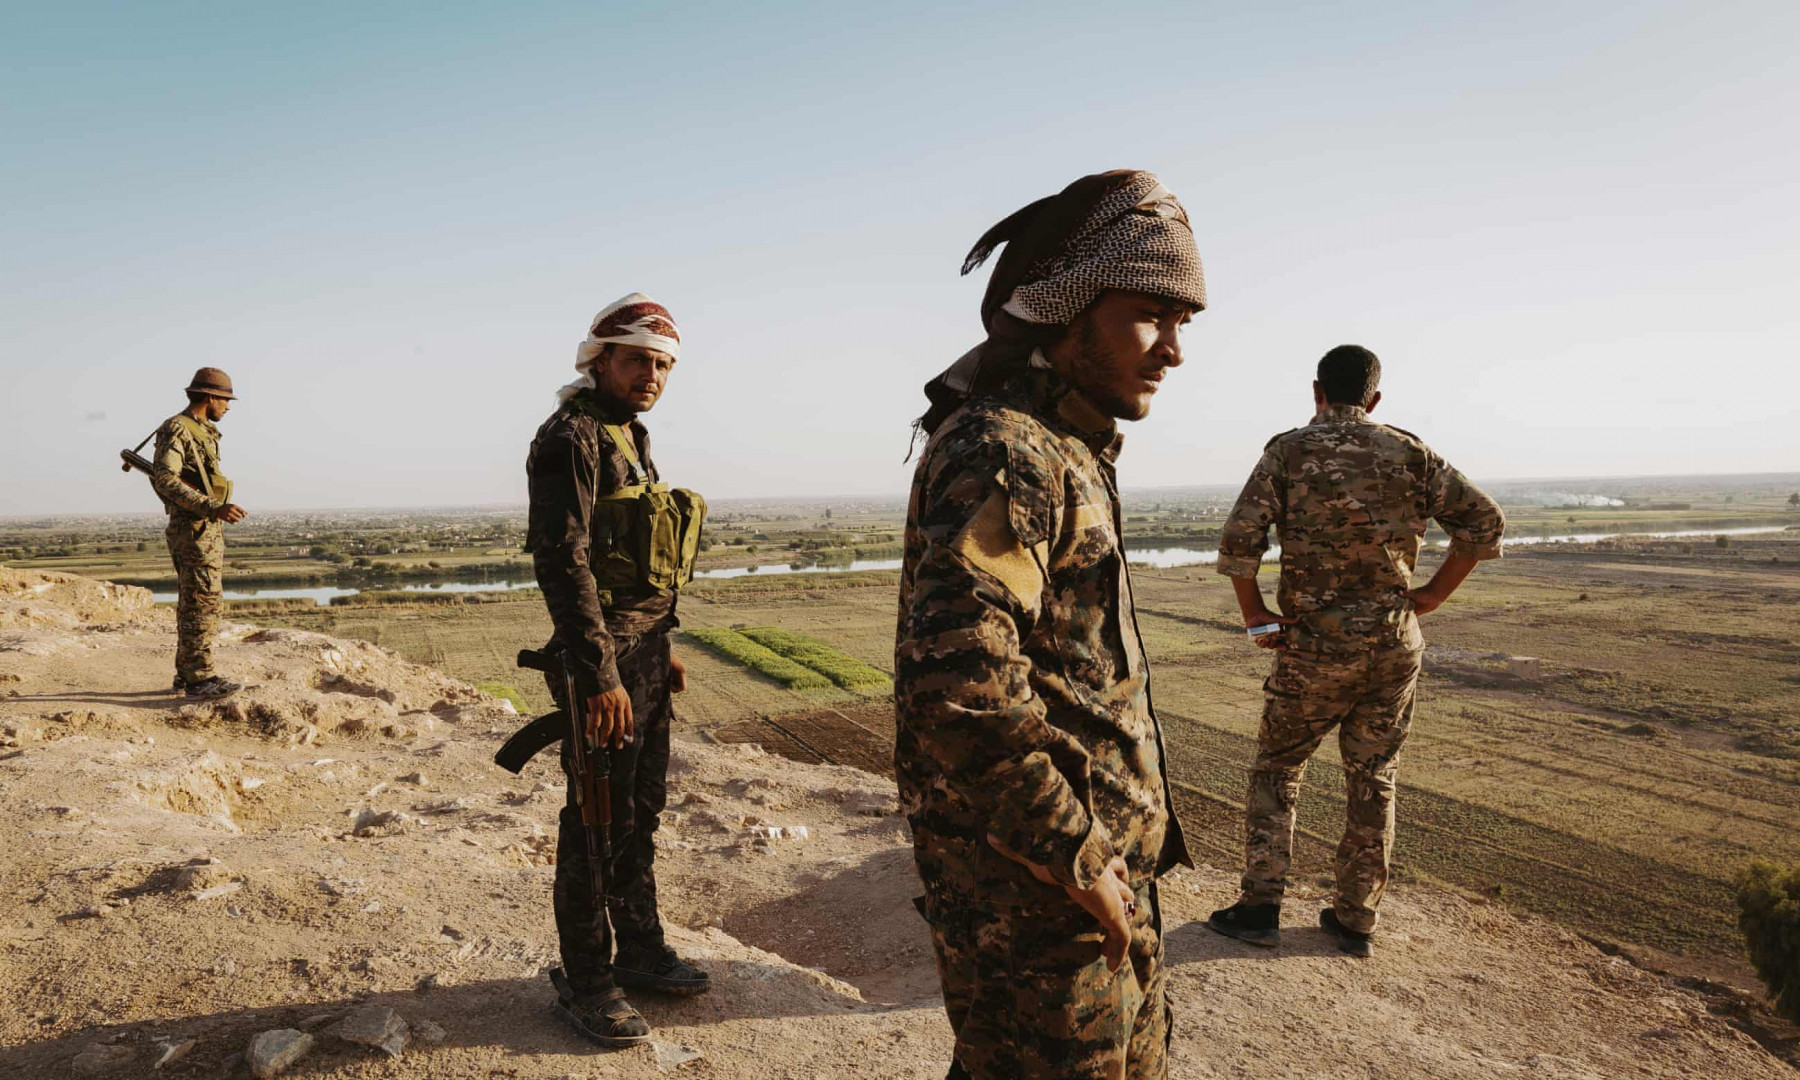 Report: Islamic State is rebuilding in Syria, say Kurdish forces